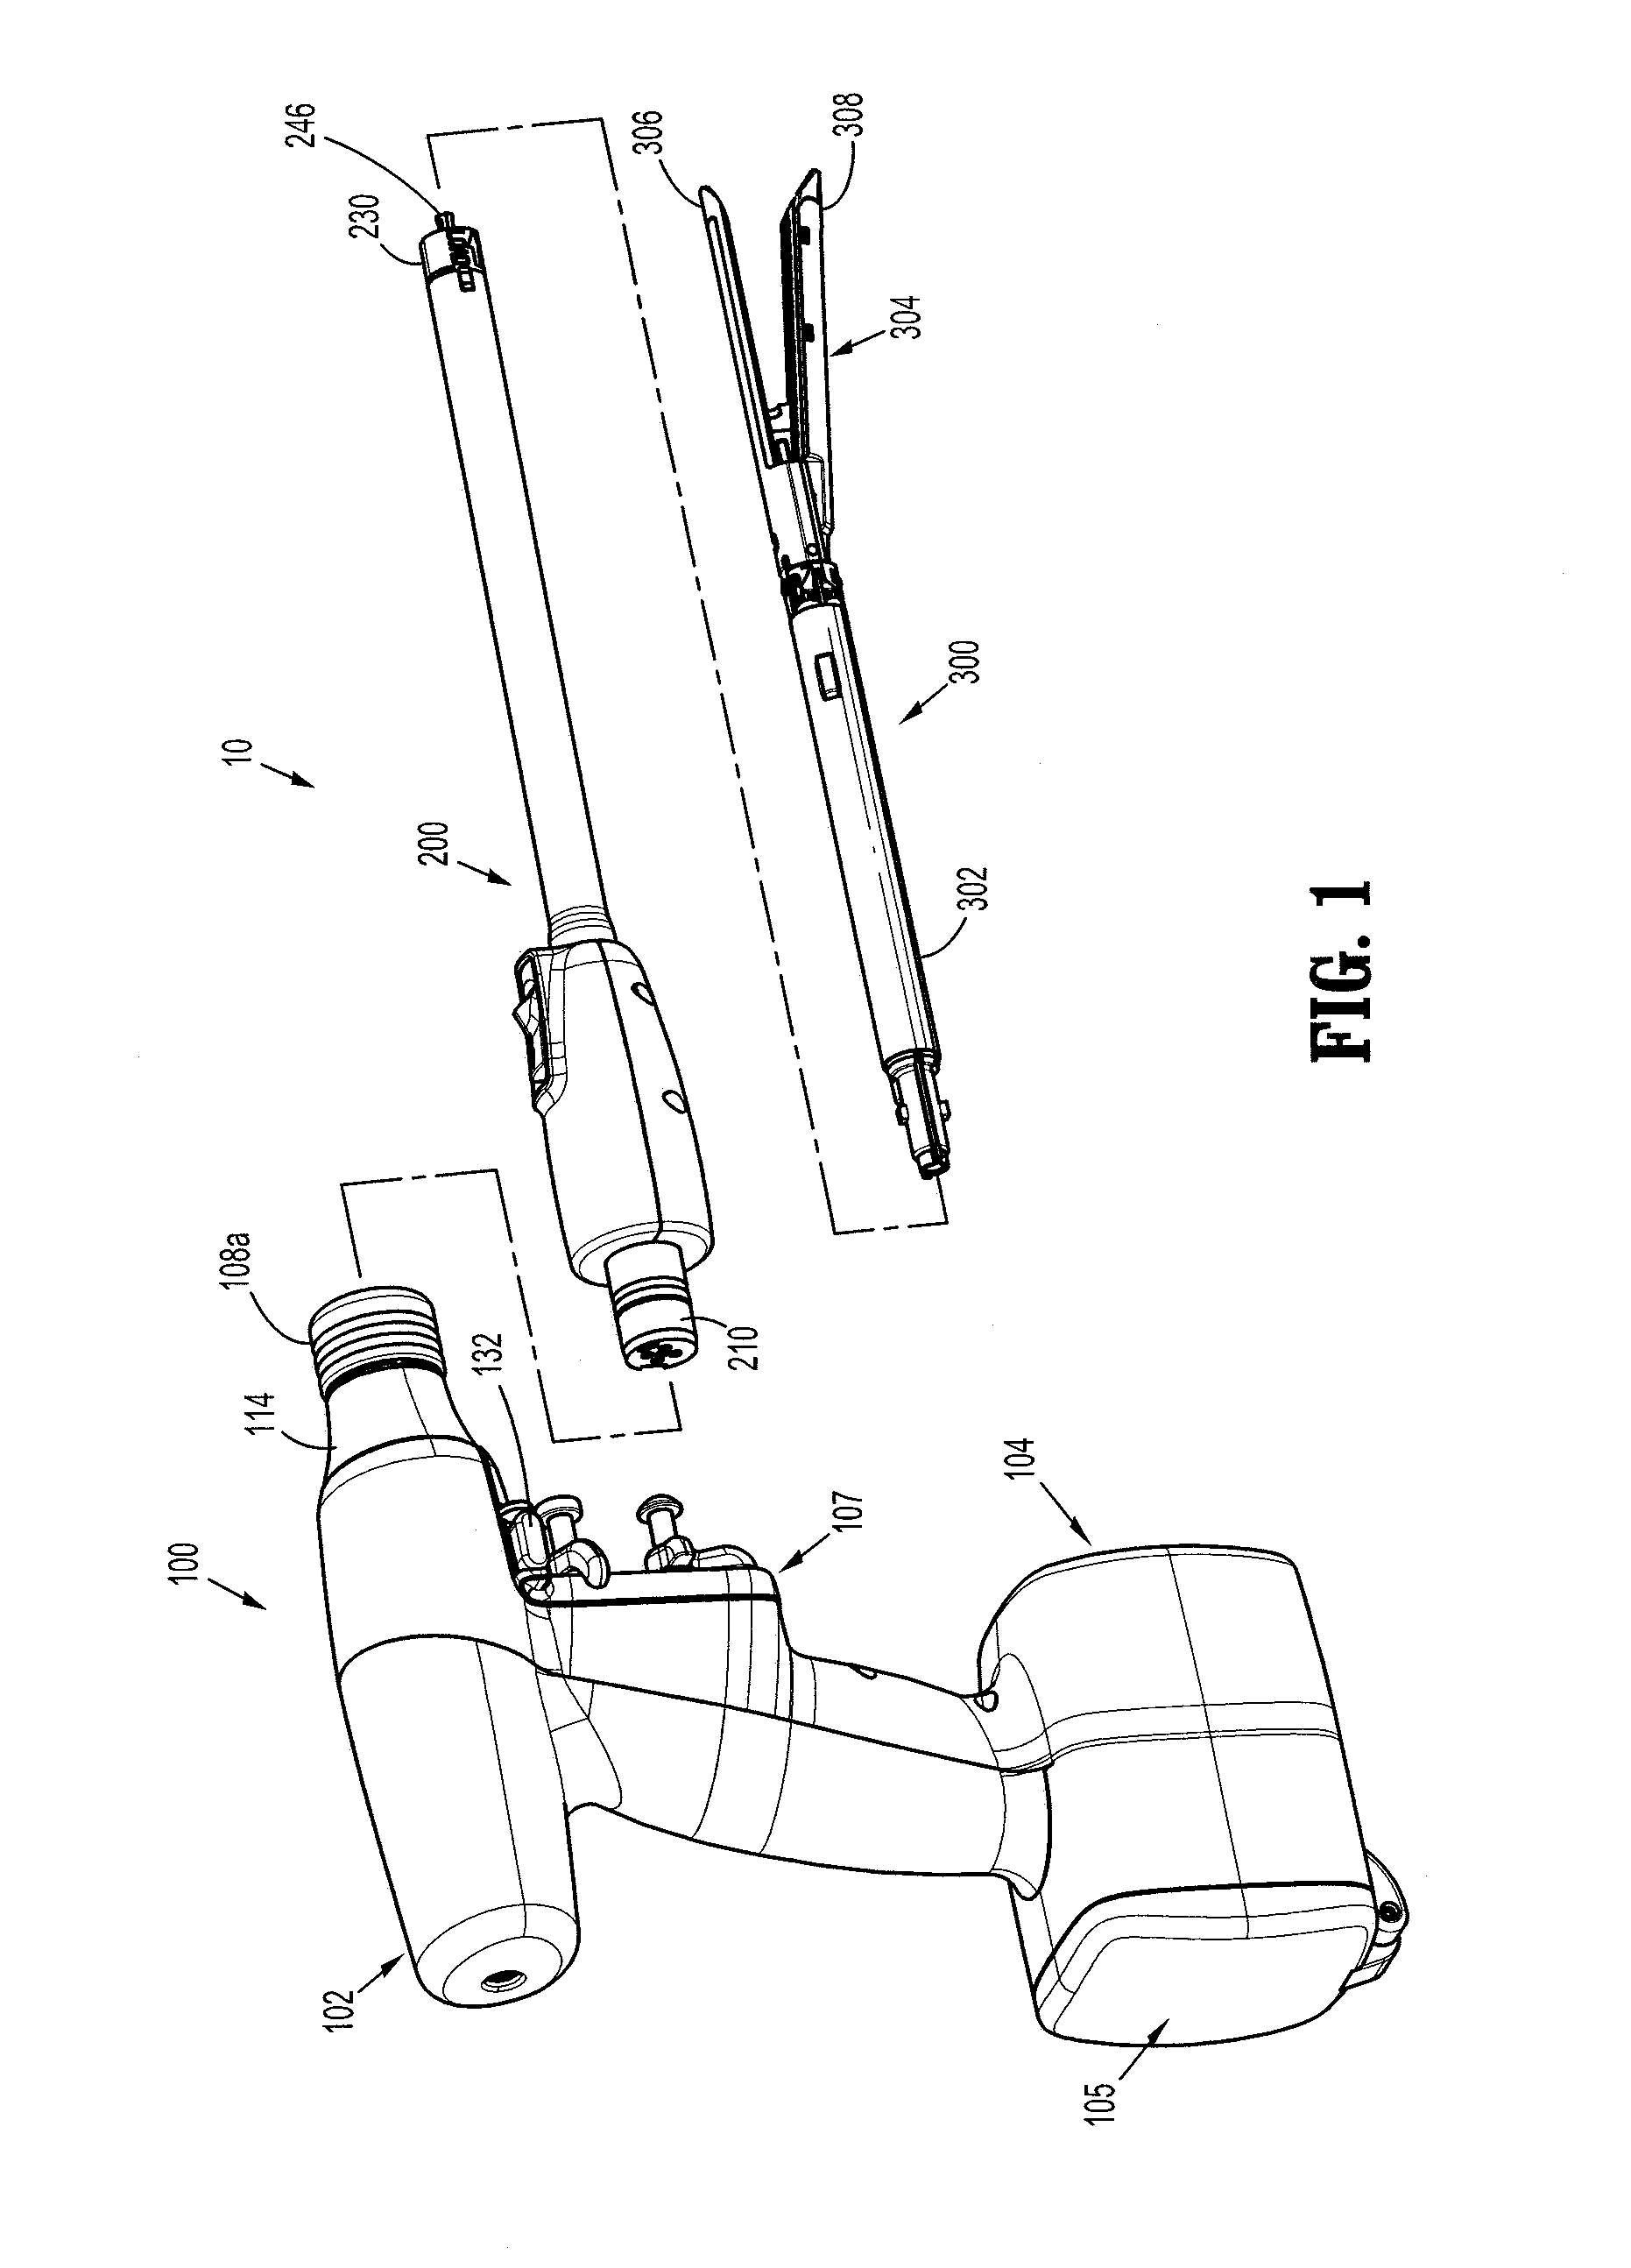 Surgical Instrument with Rapid Post Event Detection